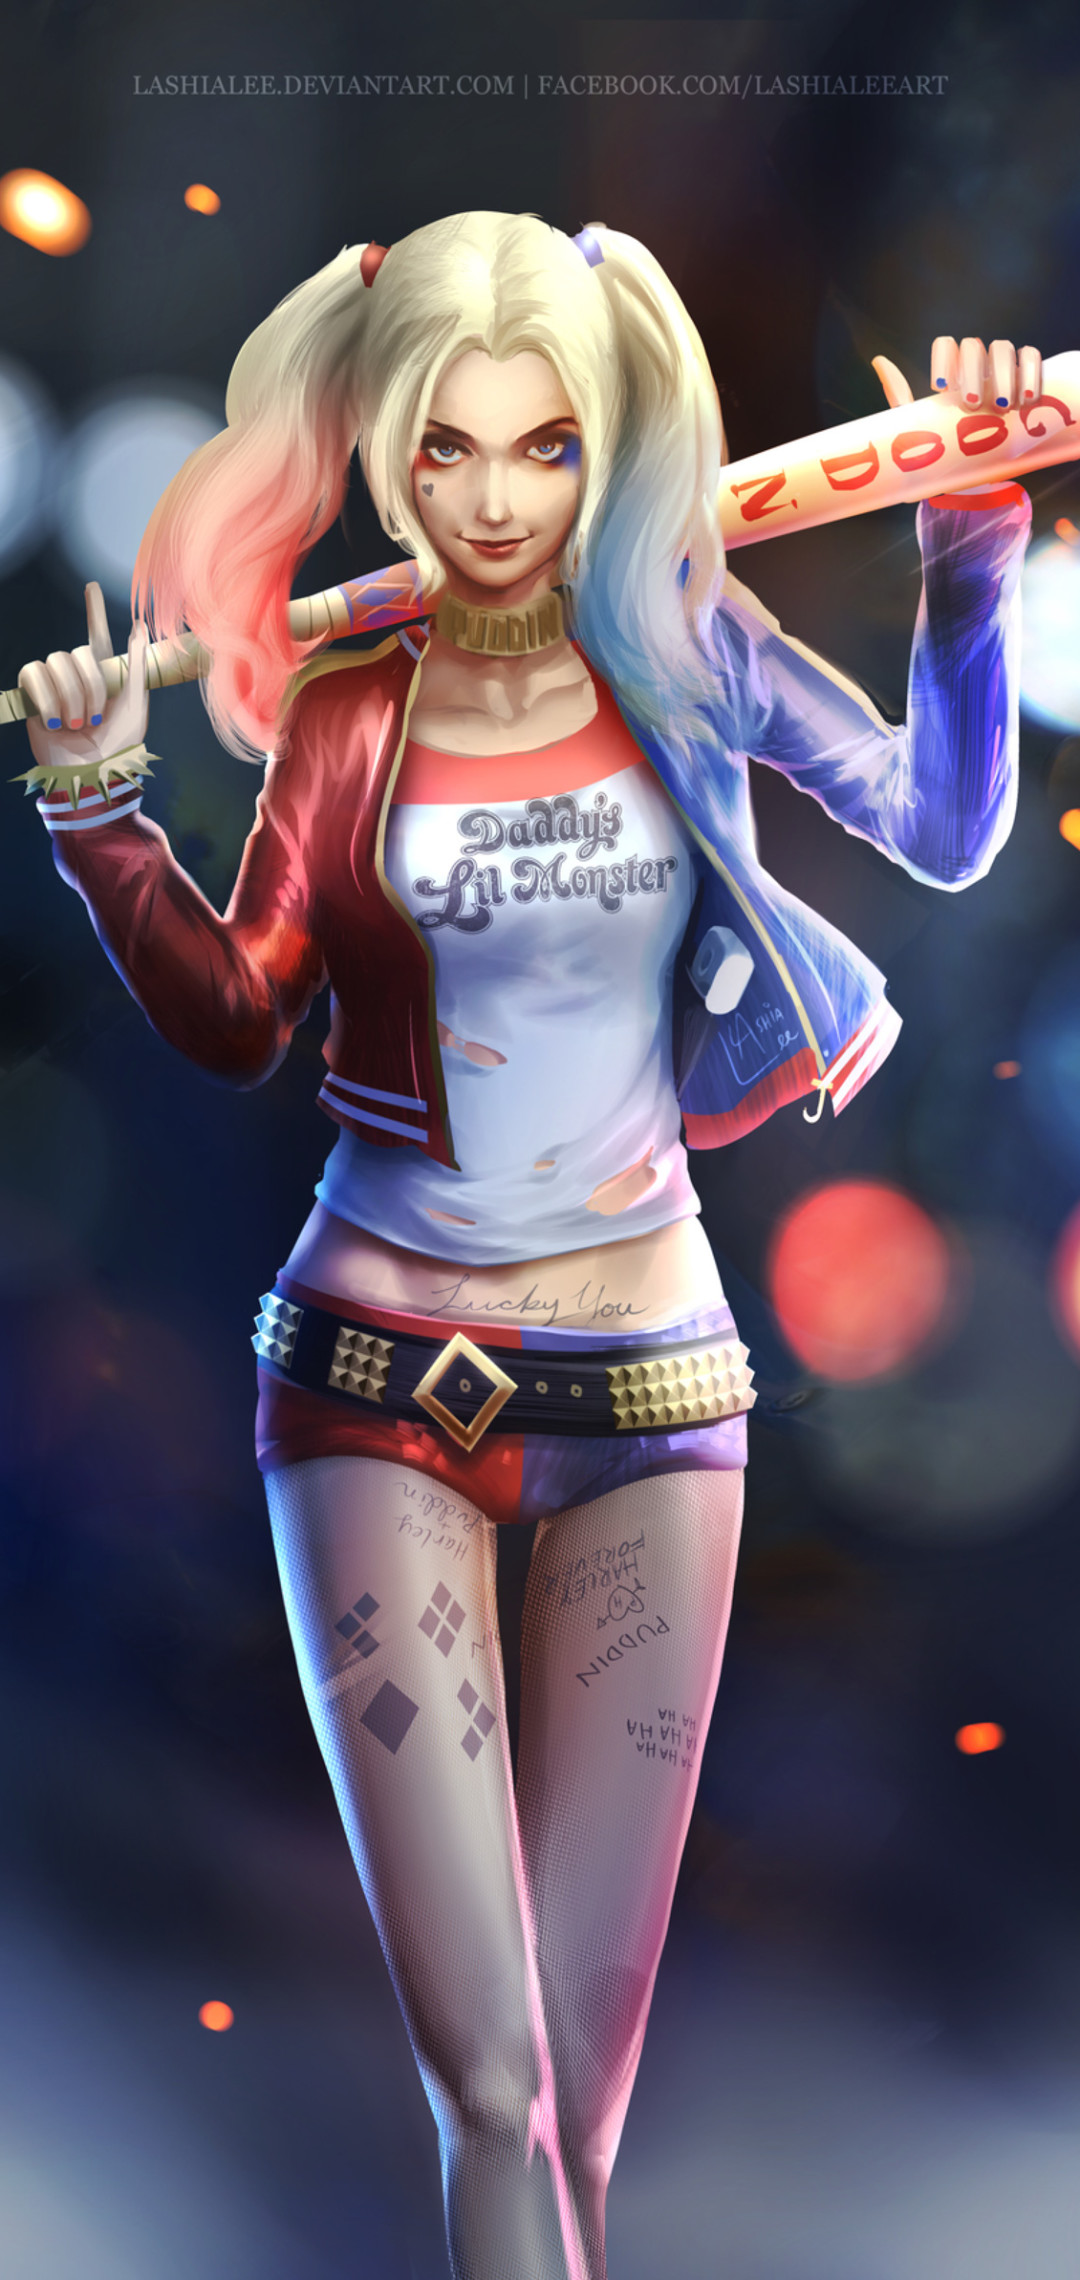 Discover 97+ about harley quinn wallpaper best .vn